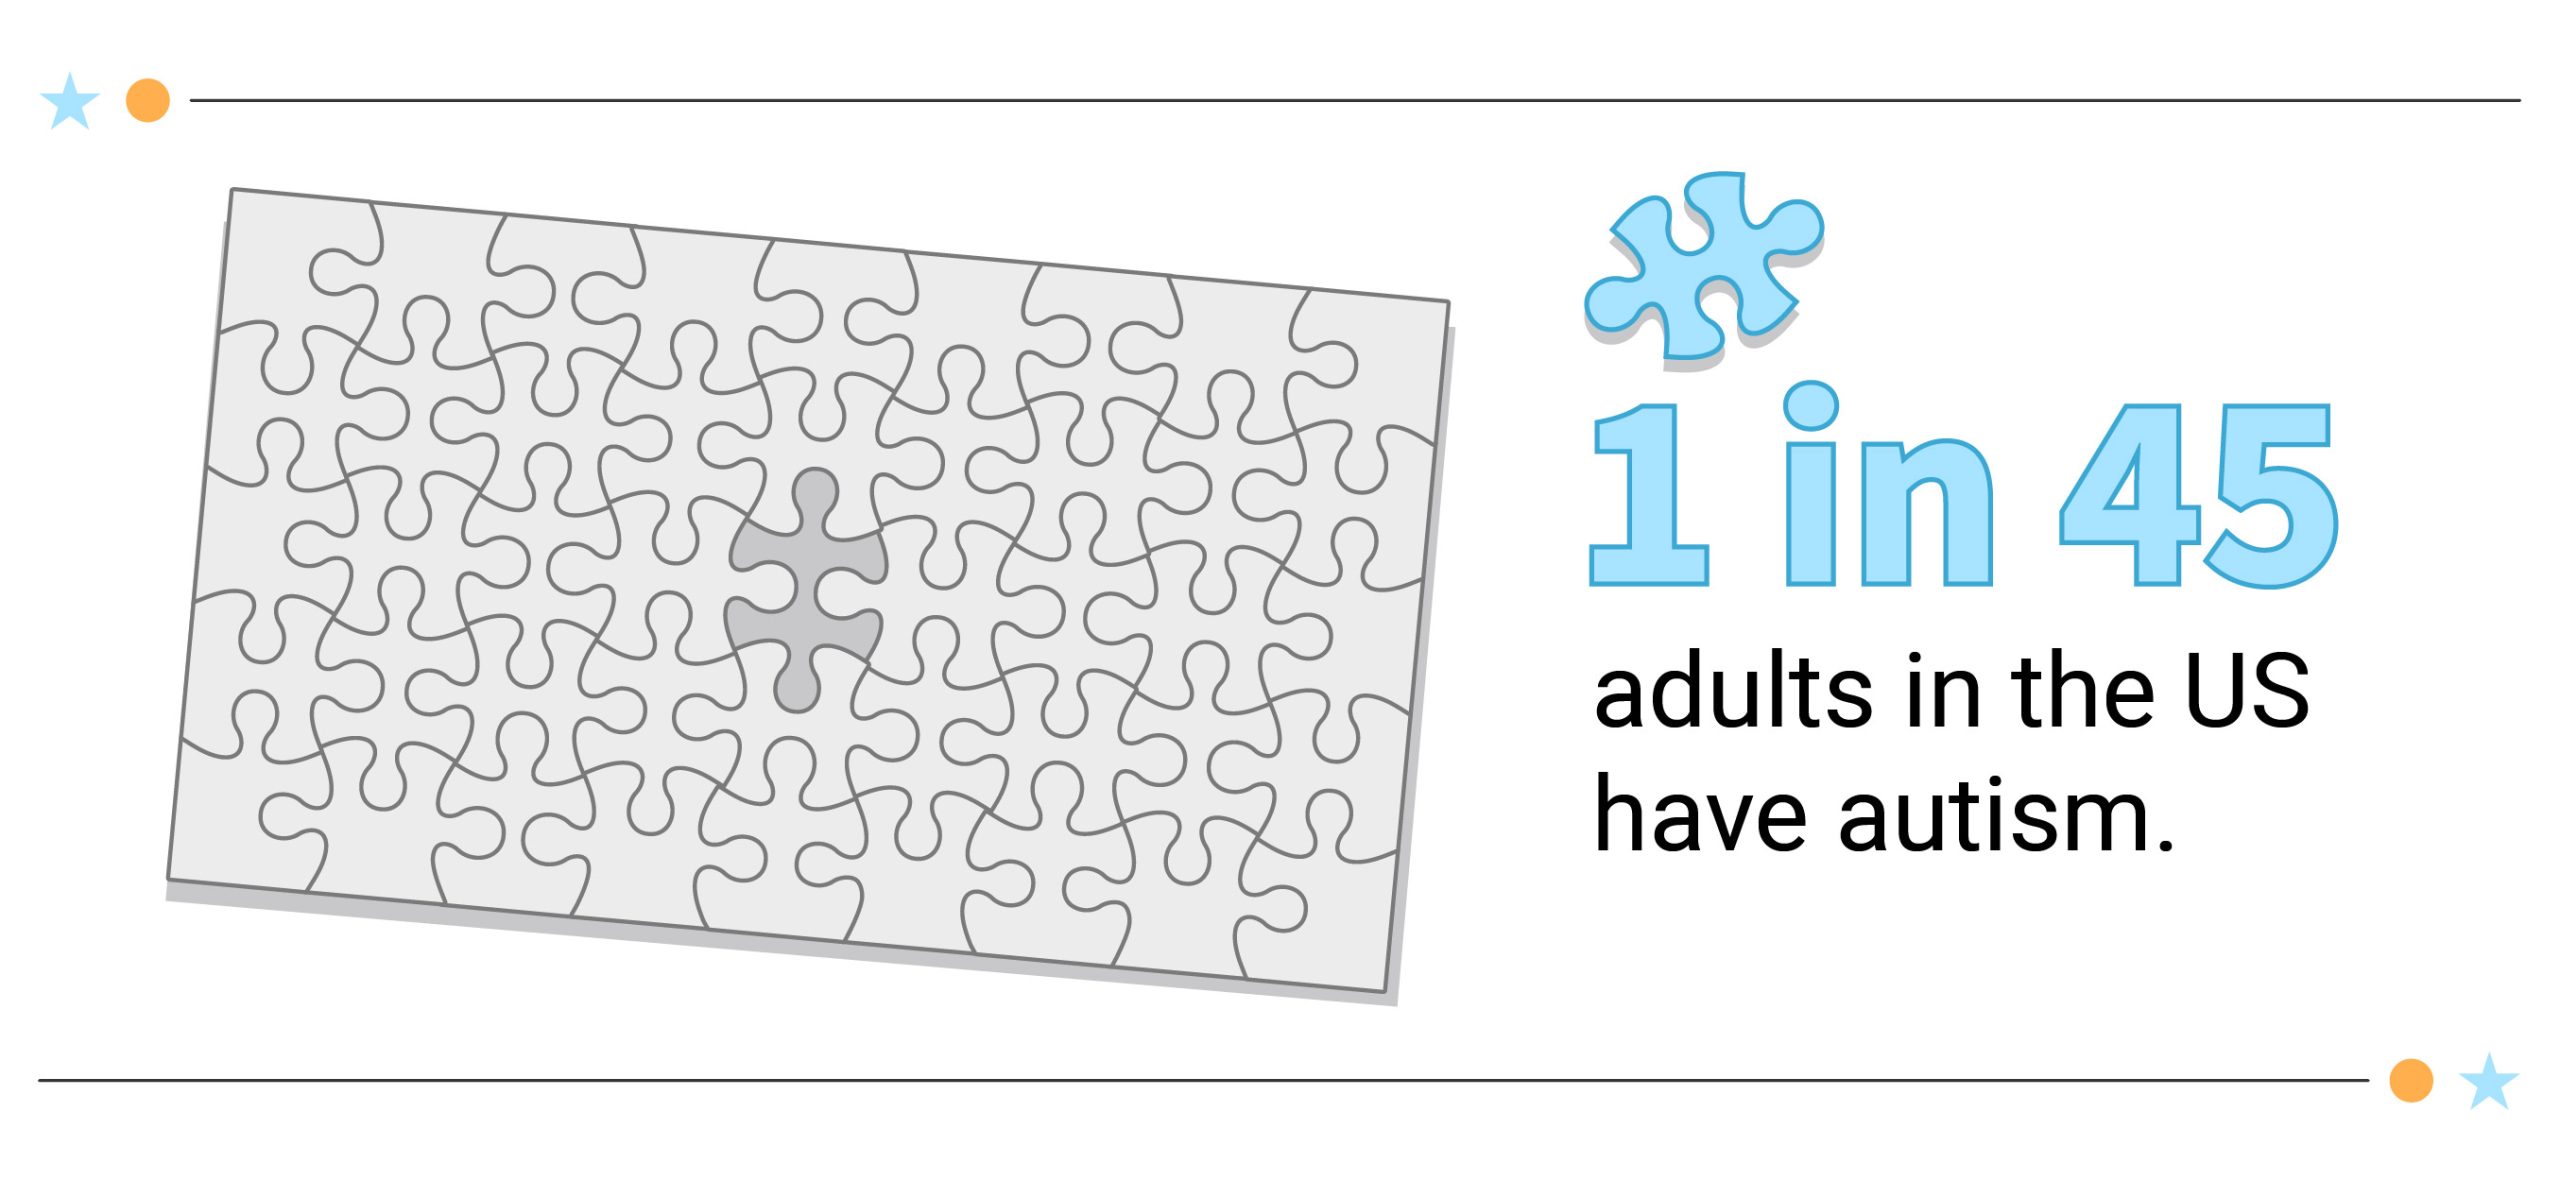 Call out text box saying 1 in 37 children and 1 in 45 adults have autism.